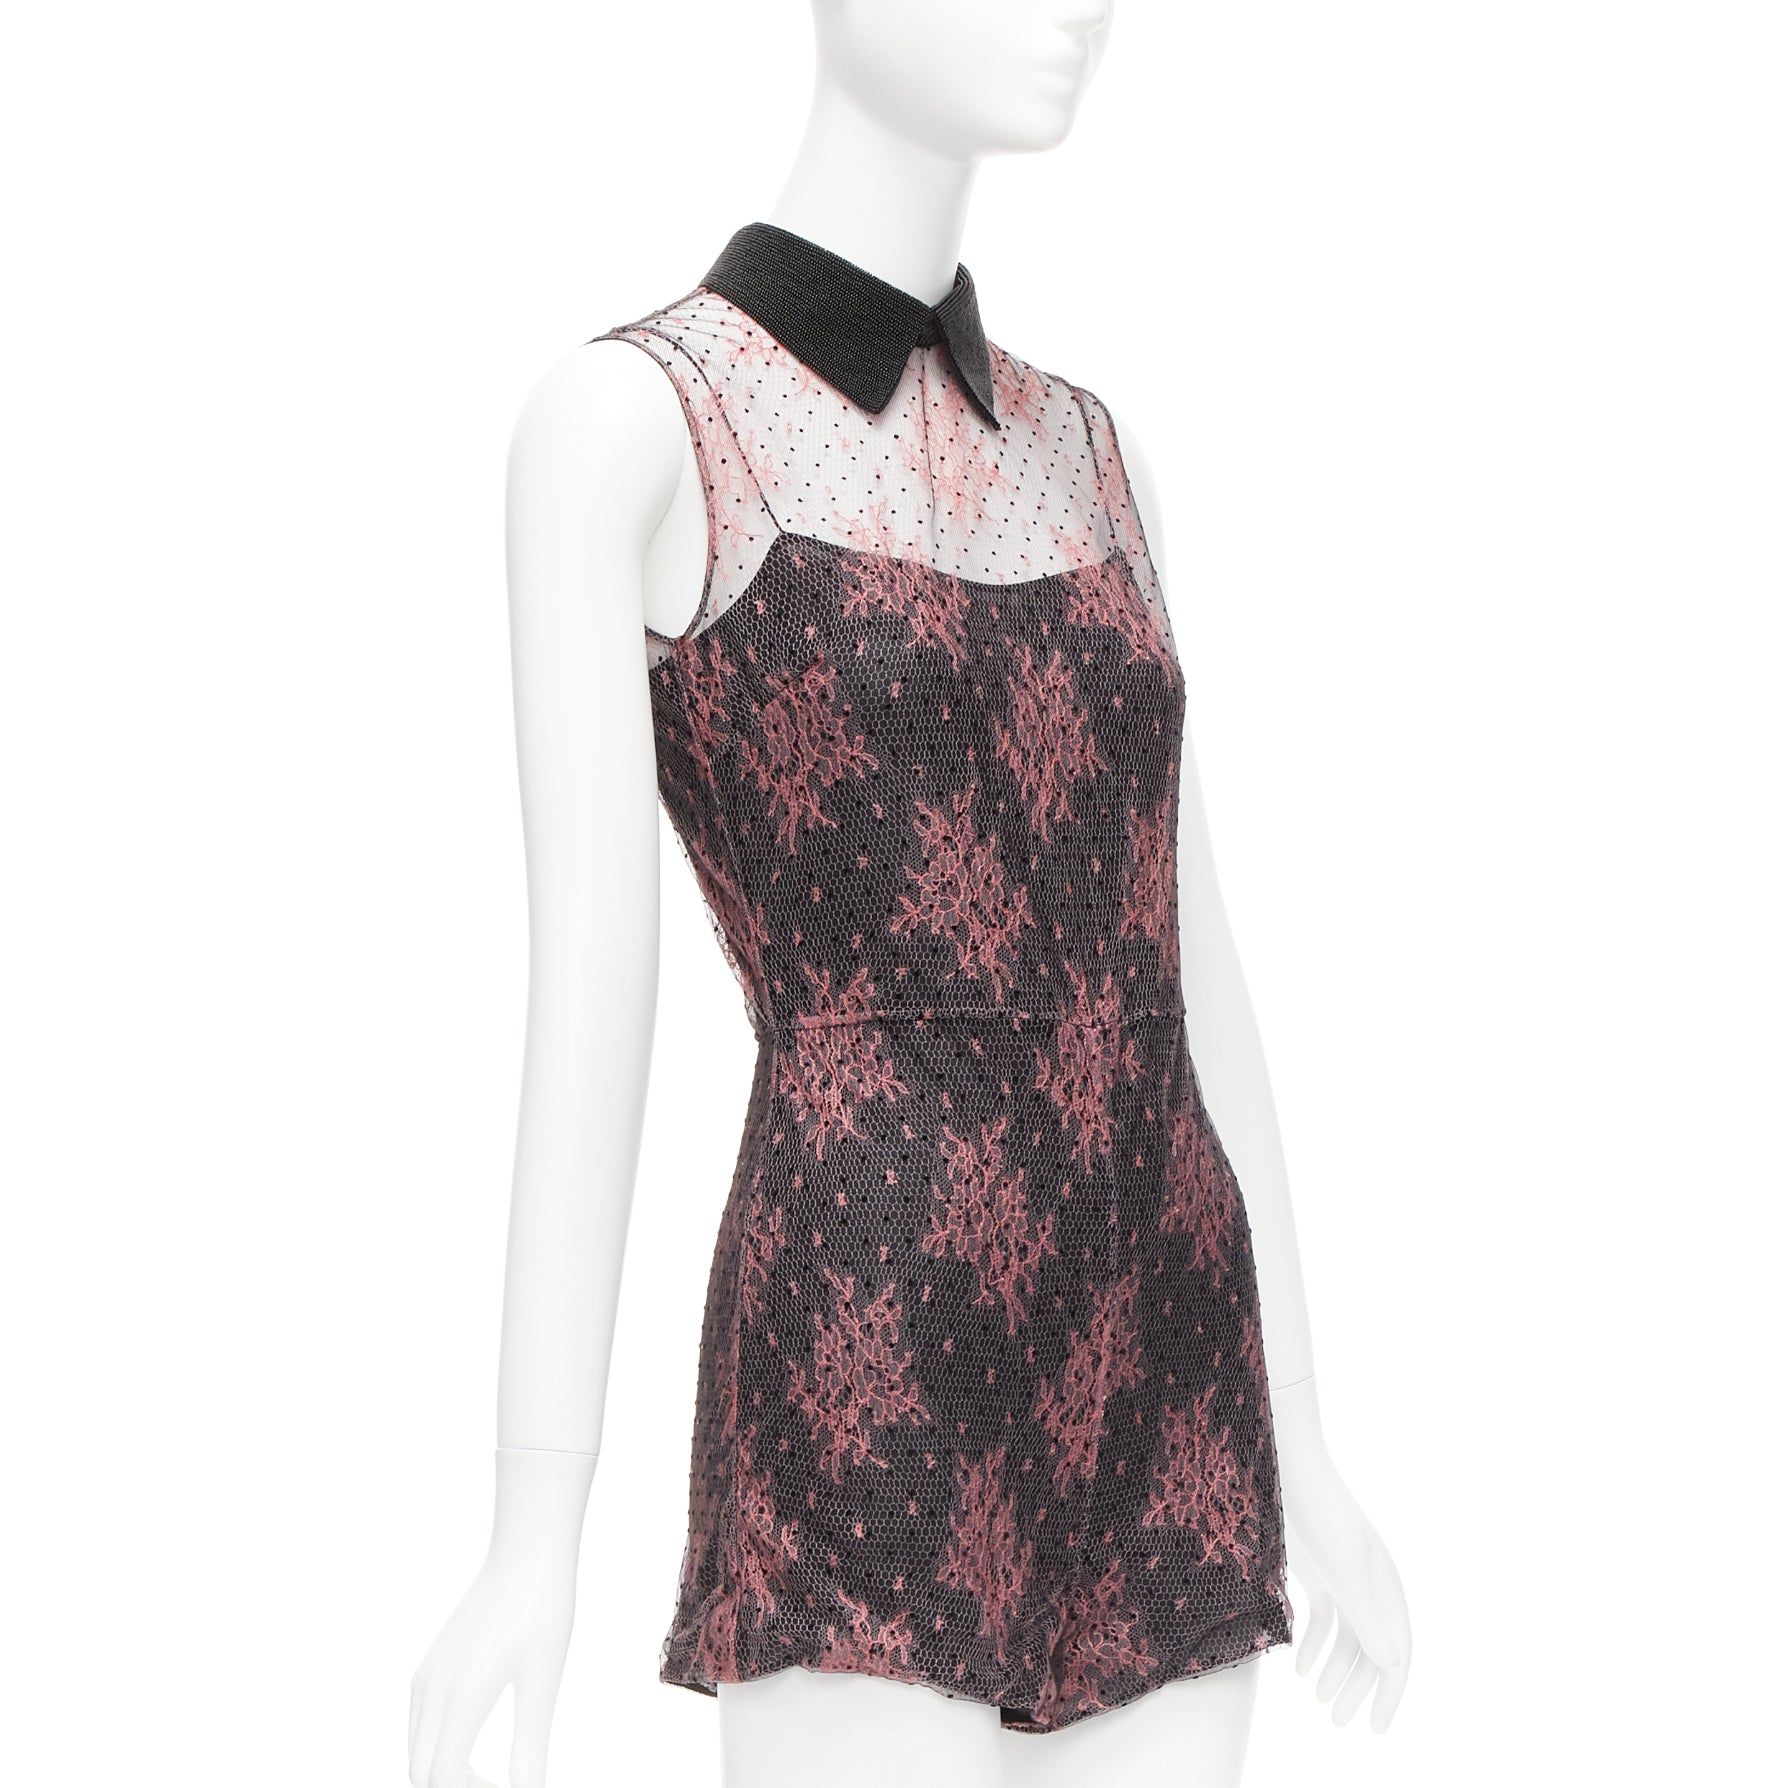 Dior CHRISTIAN DIOR black pink intricate lace overlay playsuit romper FR34 XS Size 26" / US 2 / IT 38 - 3 Thumbnail